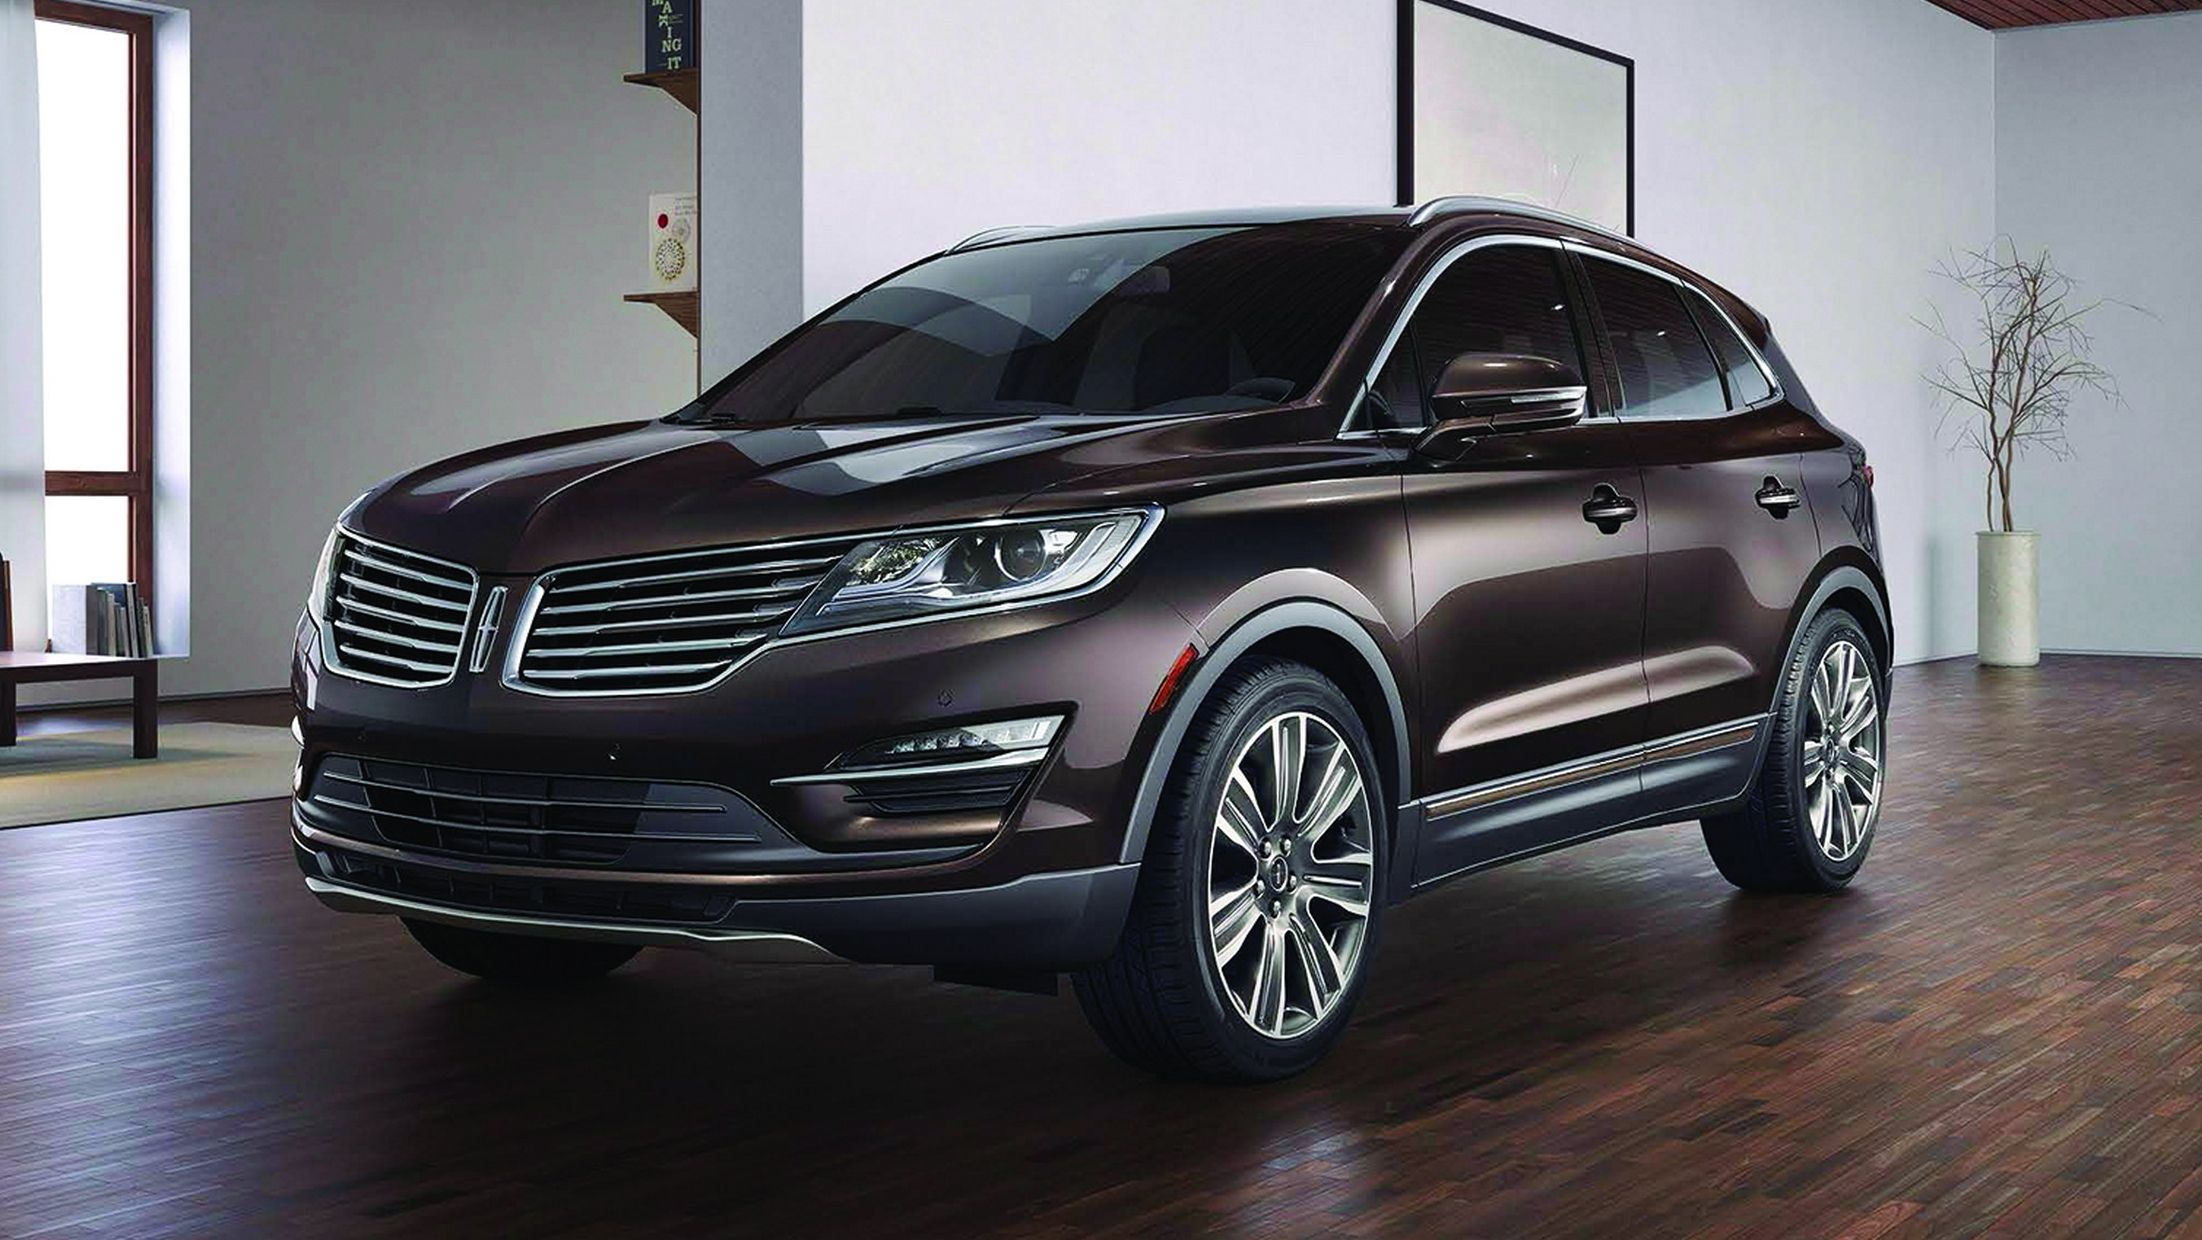  Lincoln is taking a turn for the better by ofering the Black Label package on the MKC. 